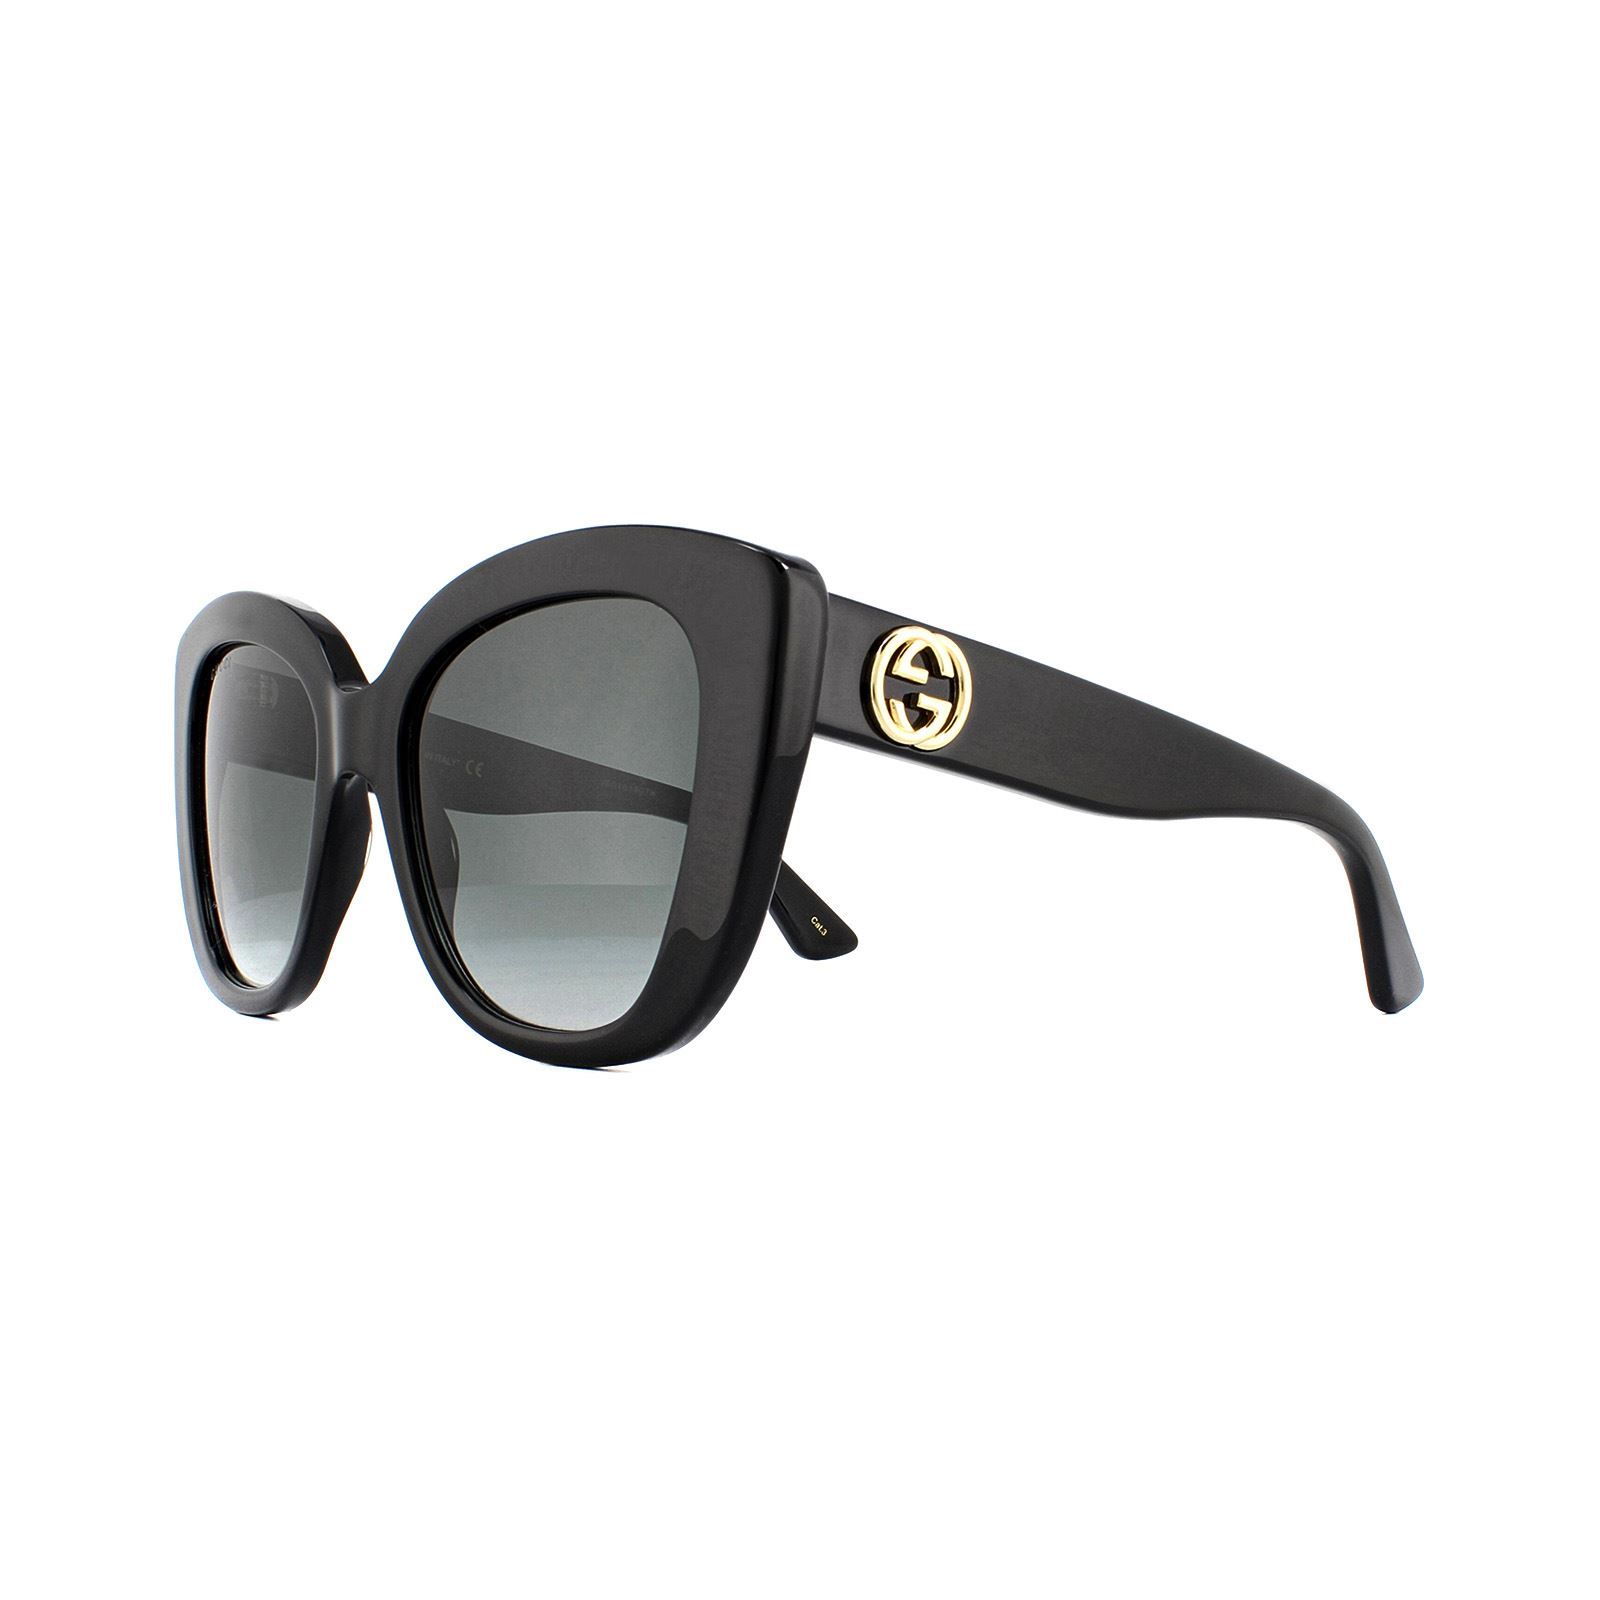 Gucci Sunglasses GG0327S 001 Black Grey Gradient are a bold acetate cat eye style for women. Embellished with the interlocking GG logo on each temple. These sunglasses are guaranteed to make a statement this summer!